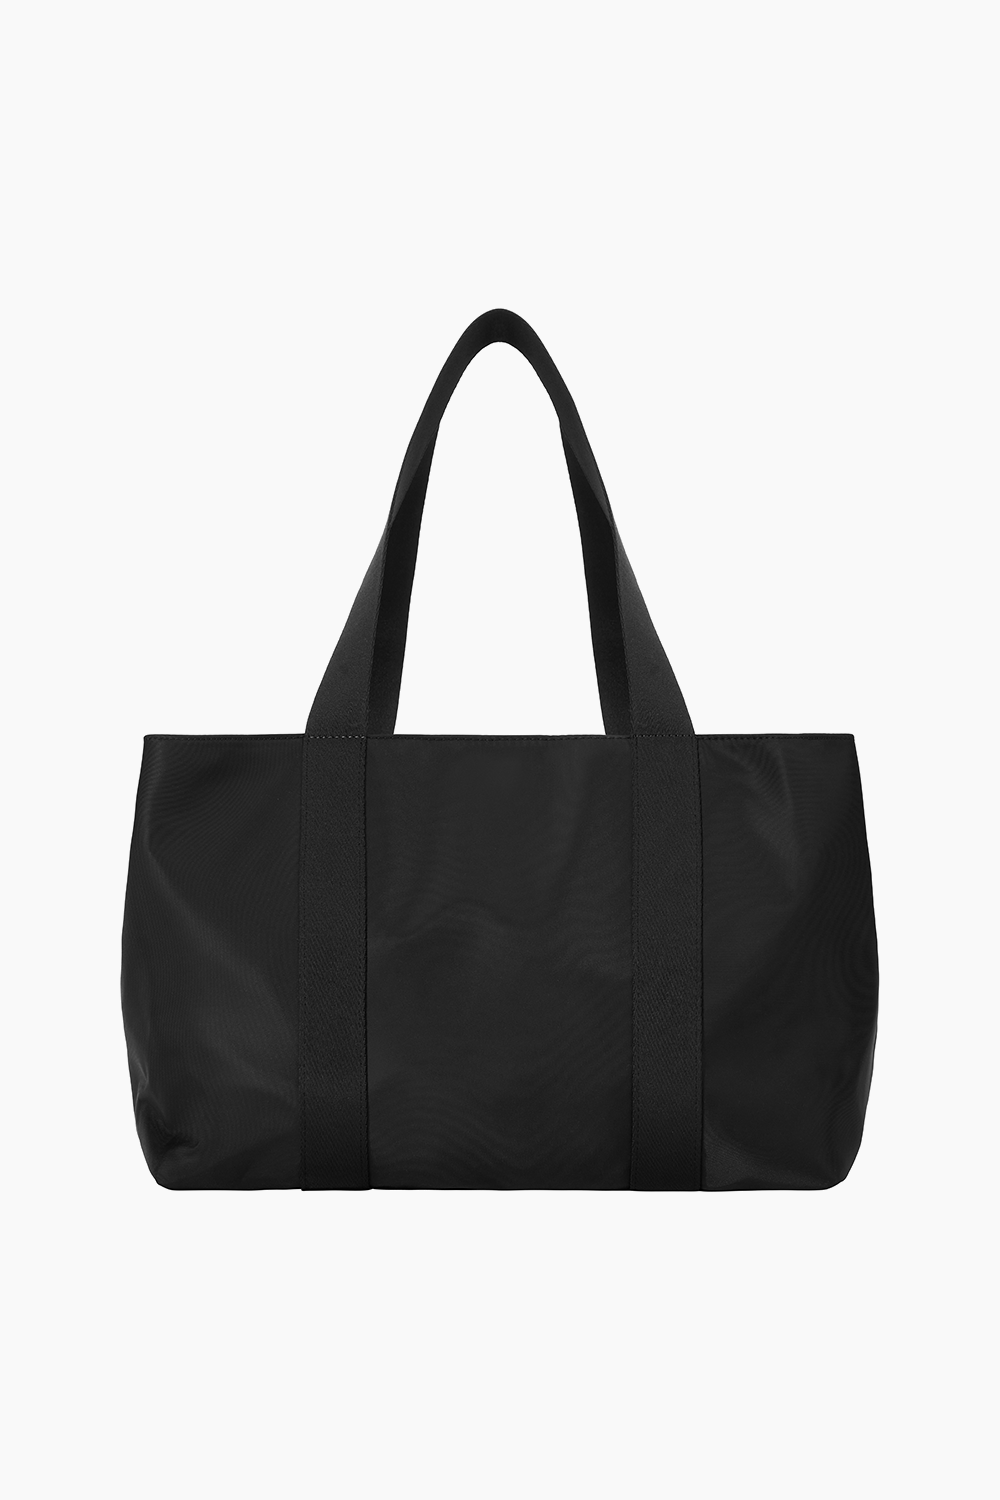 BOXY TOTE - ONYX Featured Image